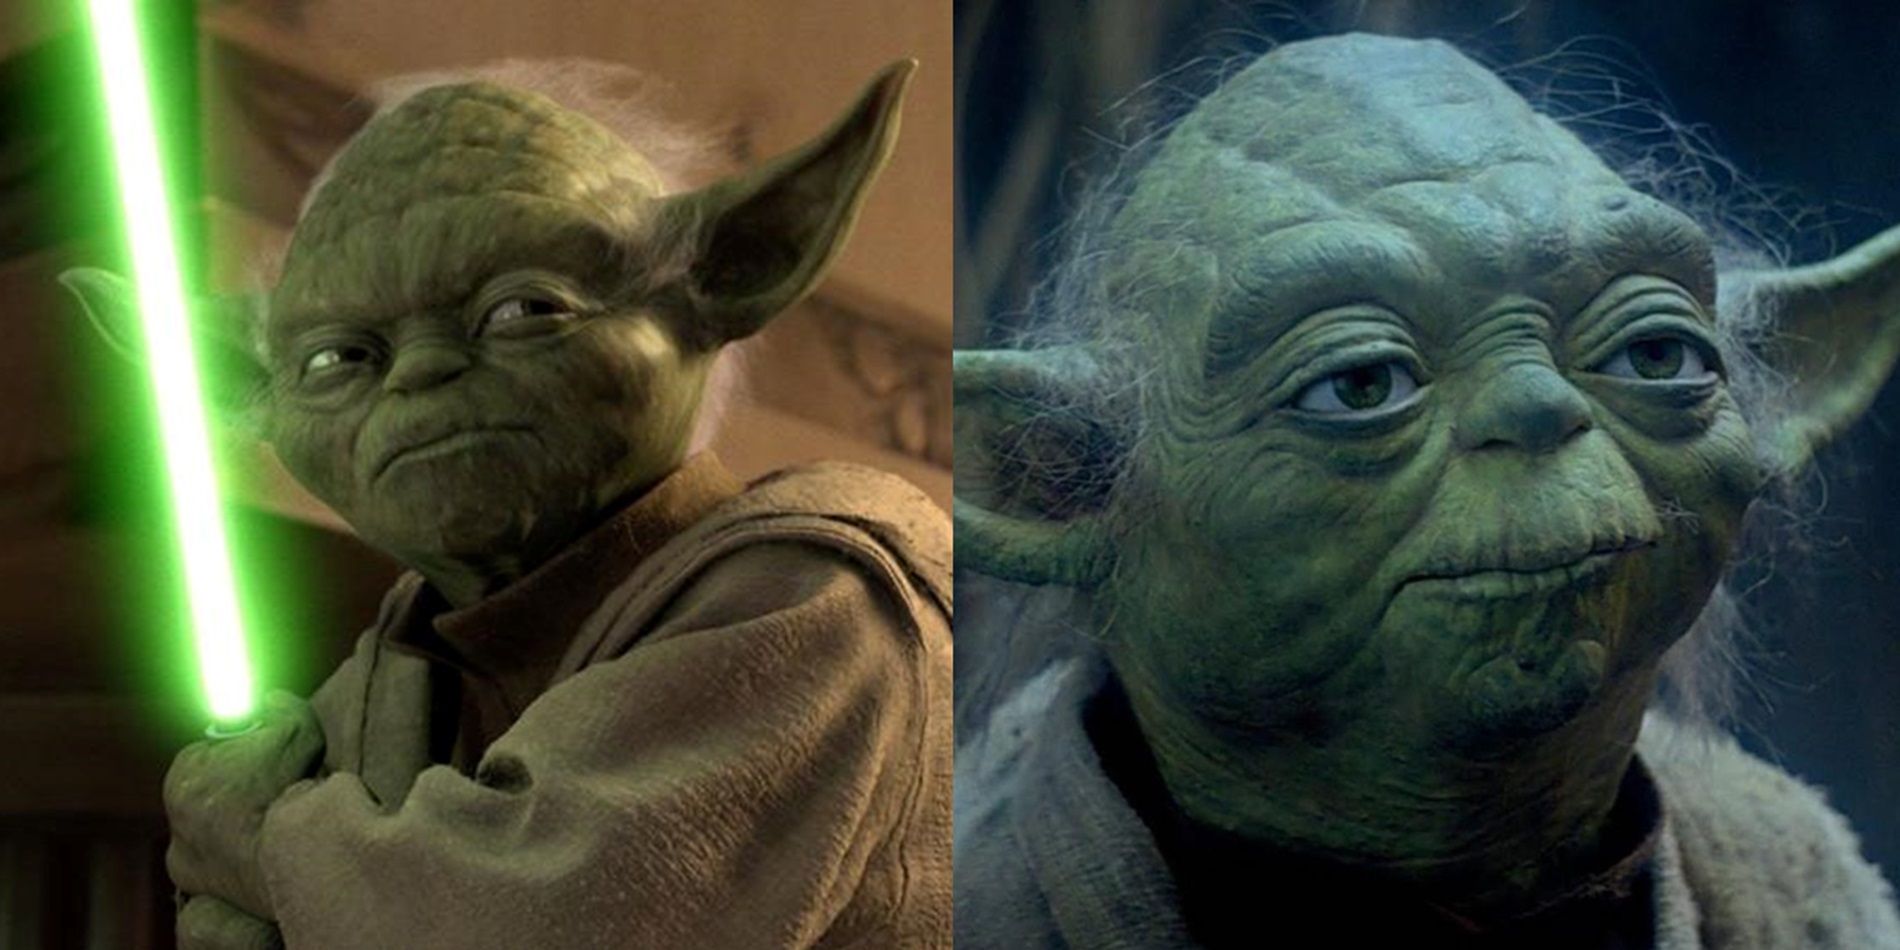 Star Wars Yodas 5 Best Quotes From The Original Trilogy (& 5 From The Prequels)